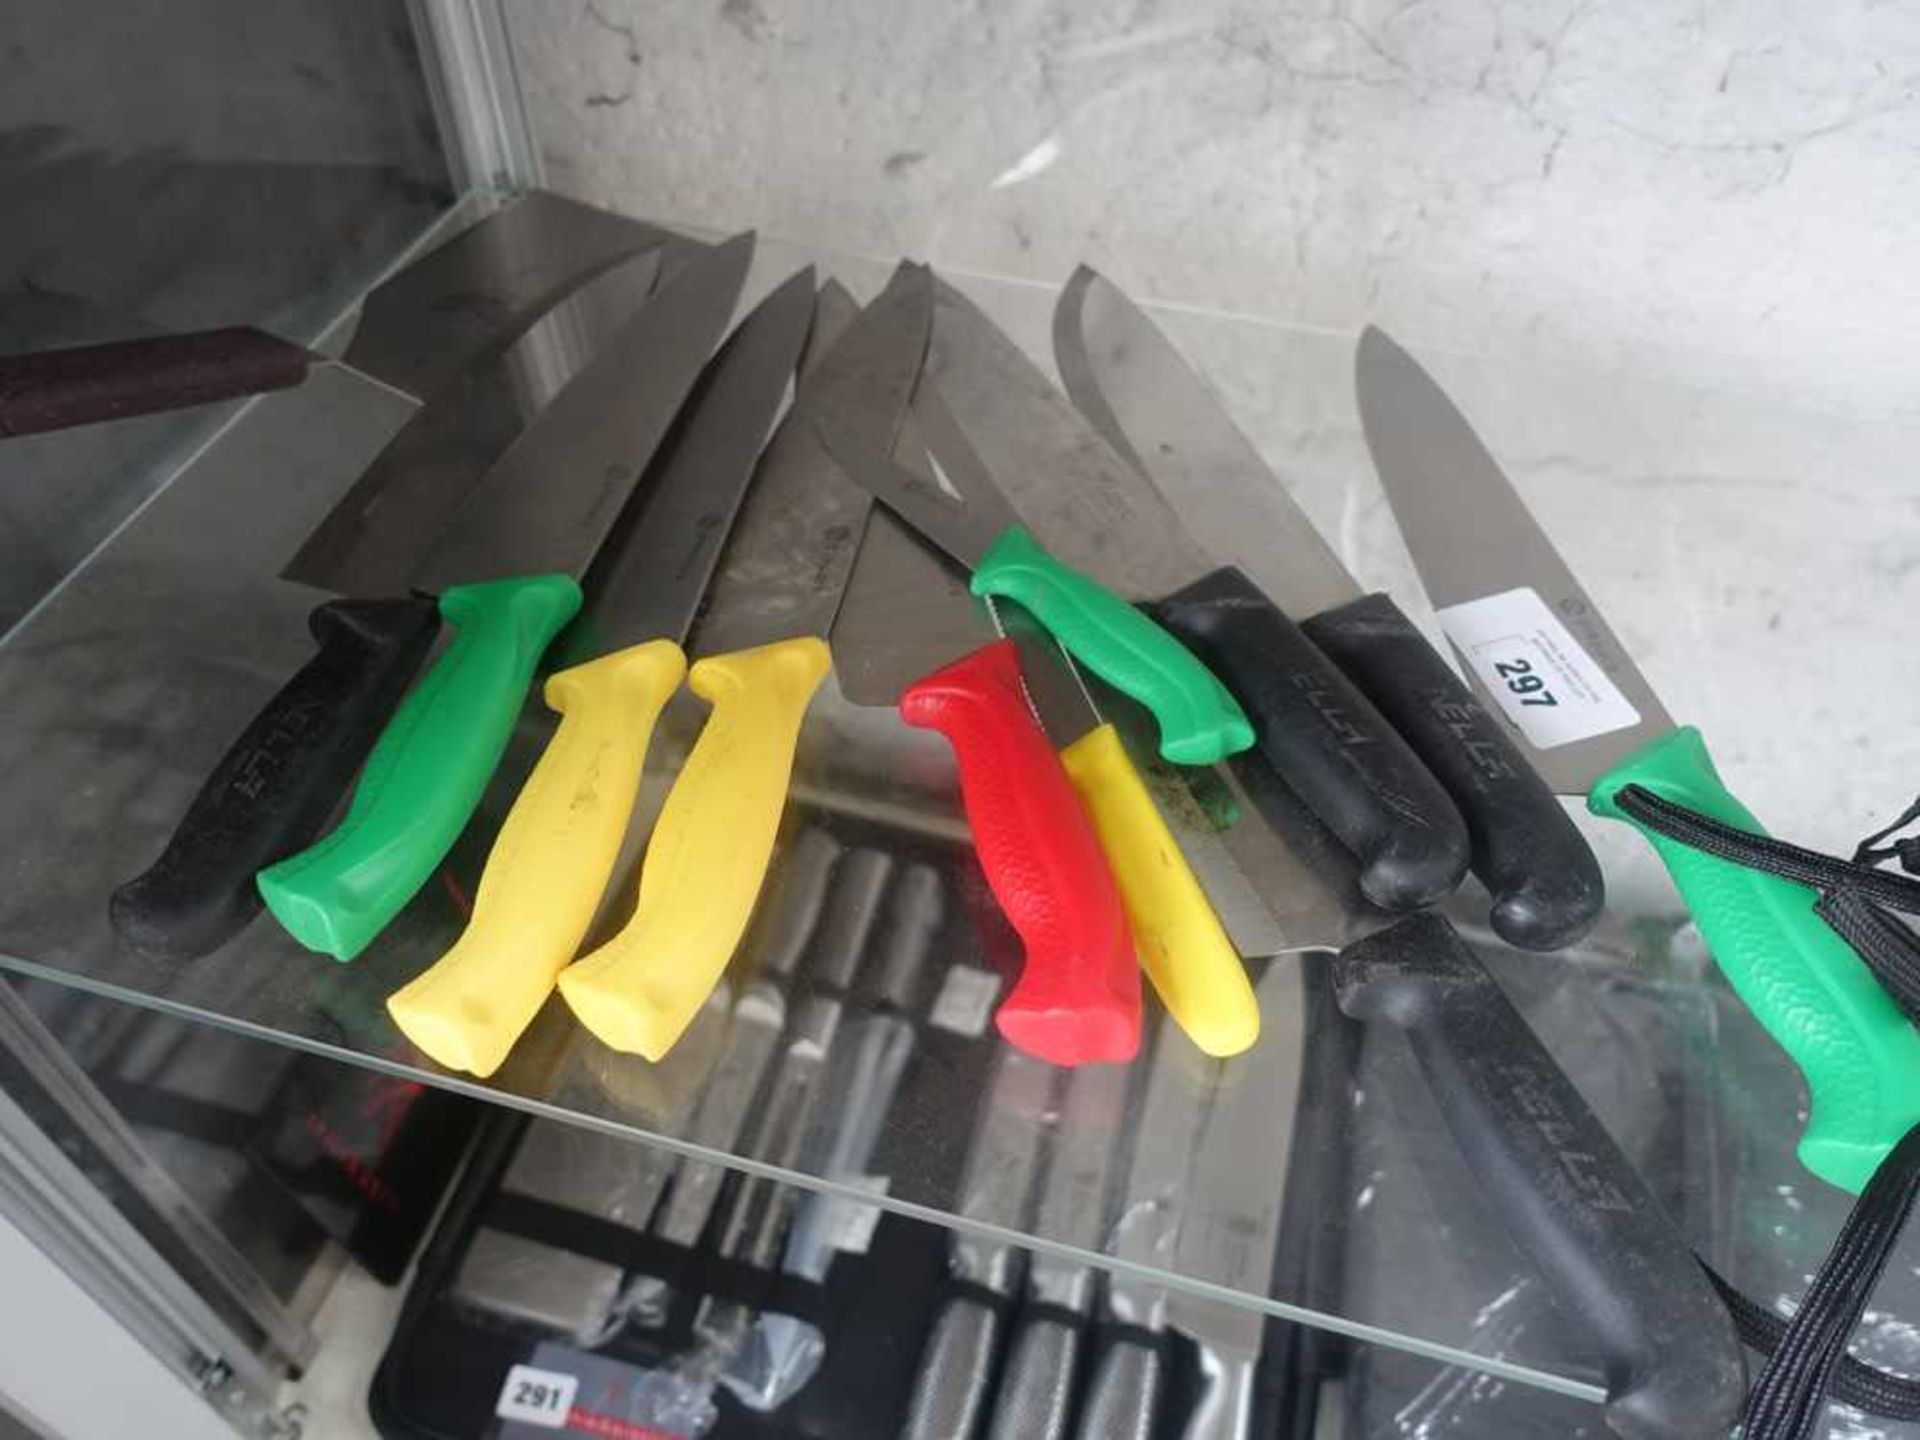 +VAT Half shelf of various chefs knives with colour coded handles